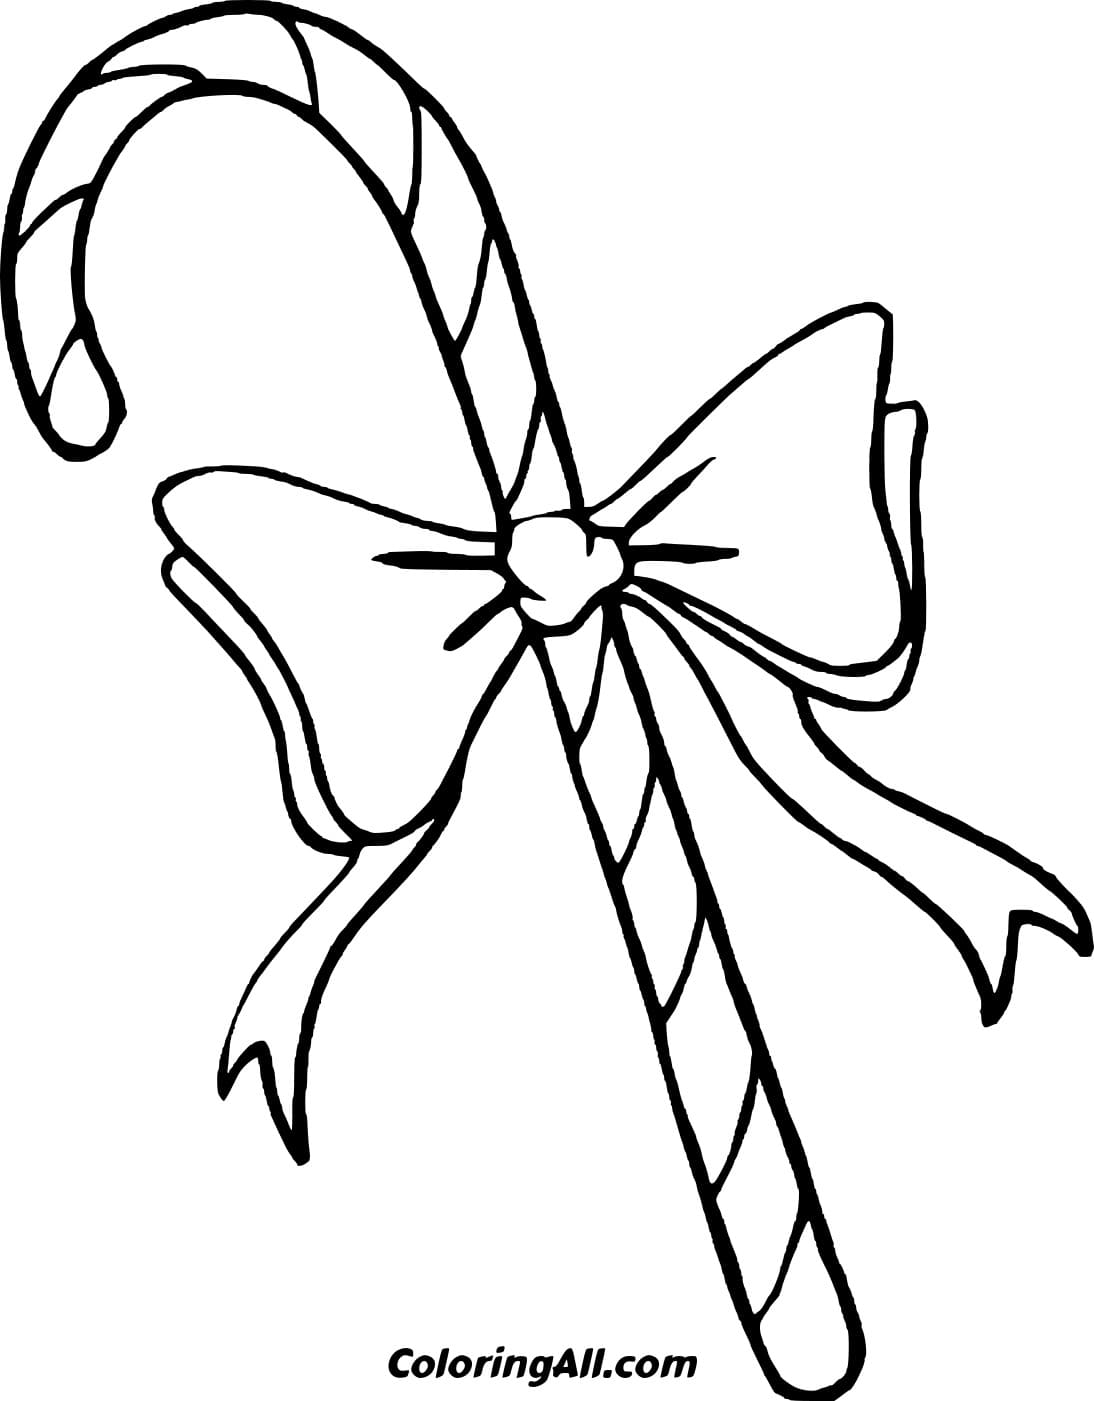 Thin Candy Cane With A Bowknot Coloring Page